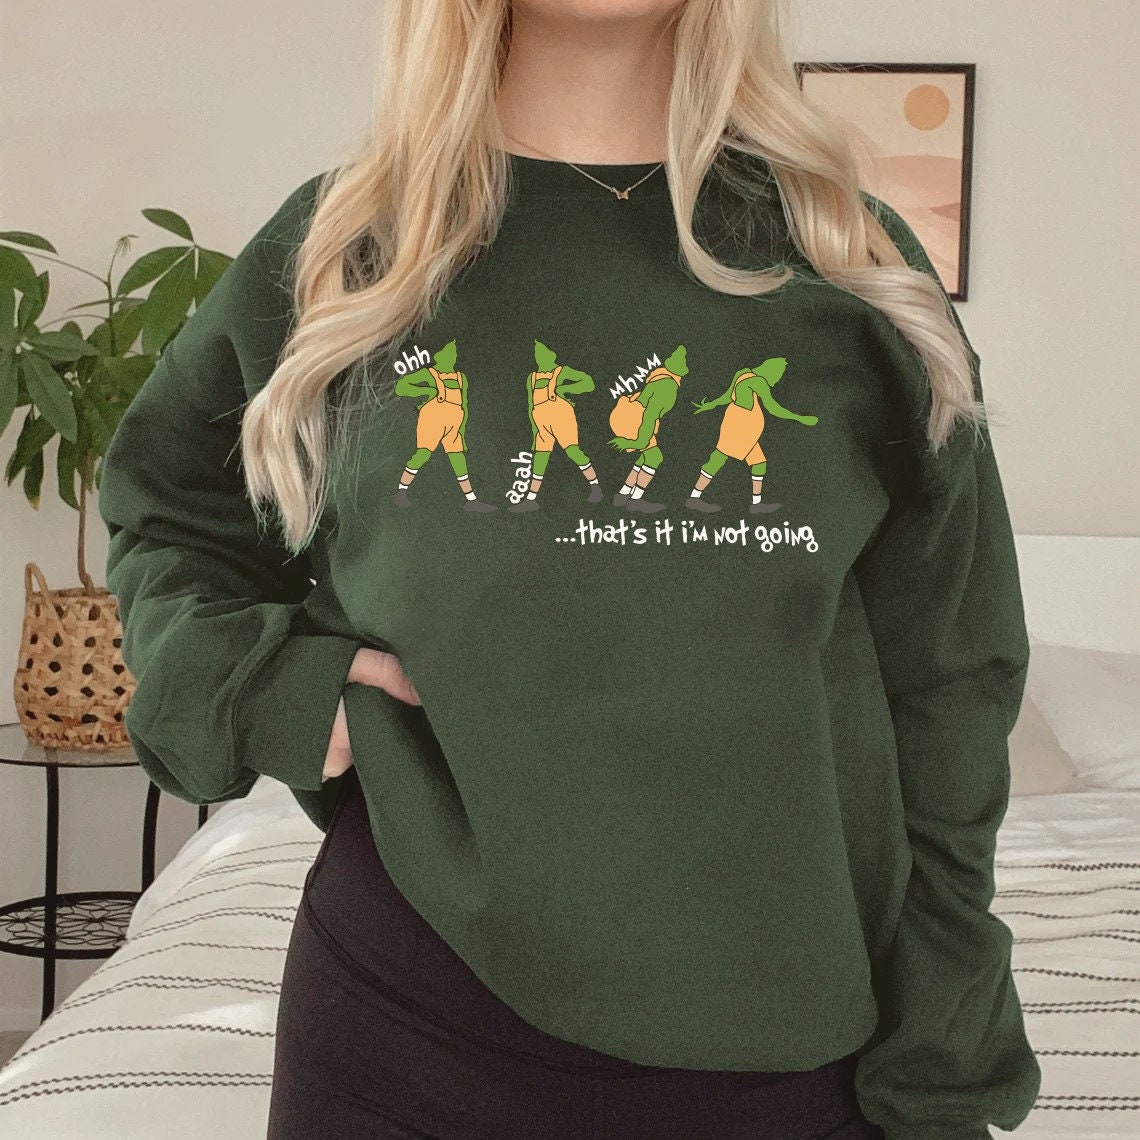 Discover That's It I'm Not Going Sweatshirt, Merry Christmas Sweatshirt, Christmas Vibes Sweatshirt, Christmas Movies Shirt, Christmas Women Sweatshirts